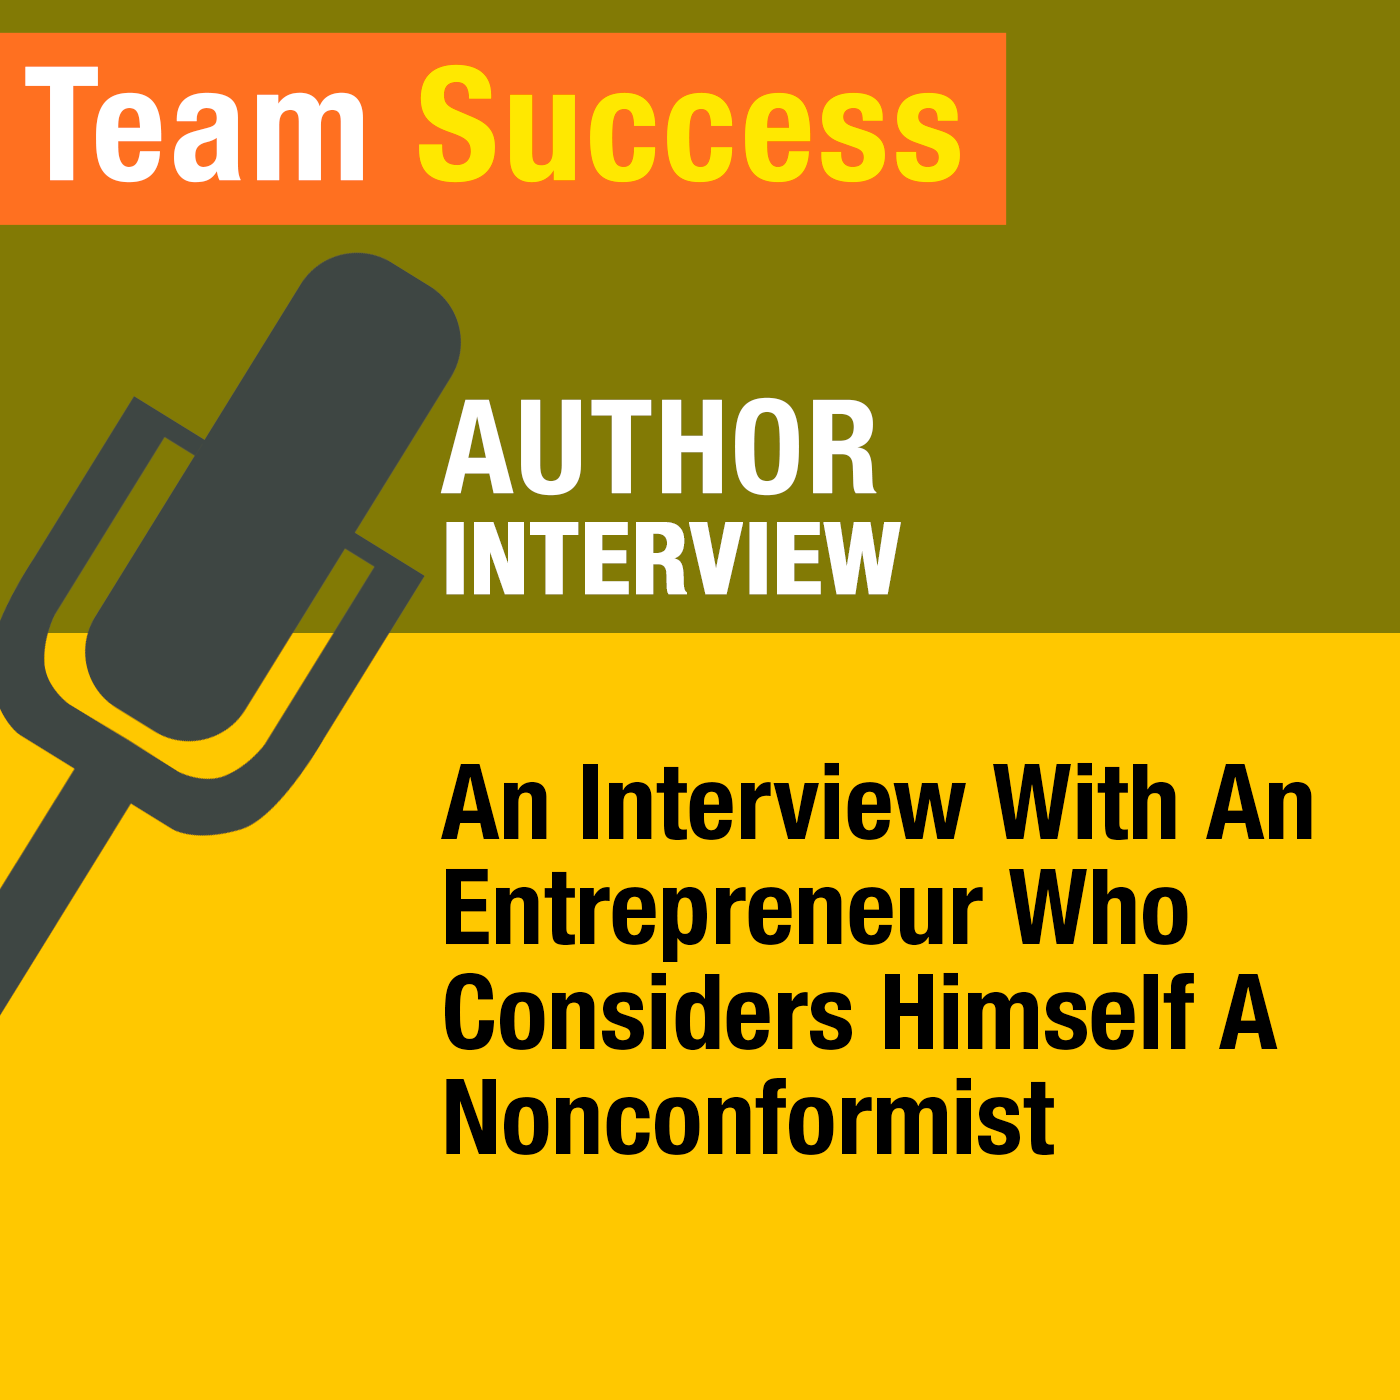 An Interview With An Entrepreneur Who Considers Himself A Nonconformist